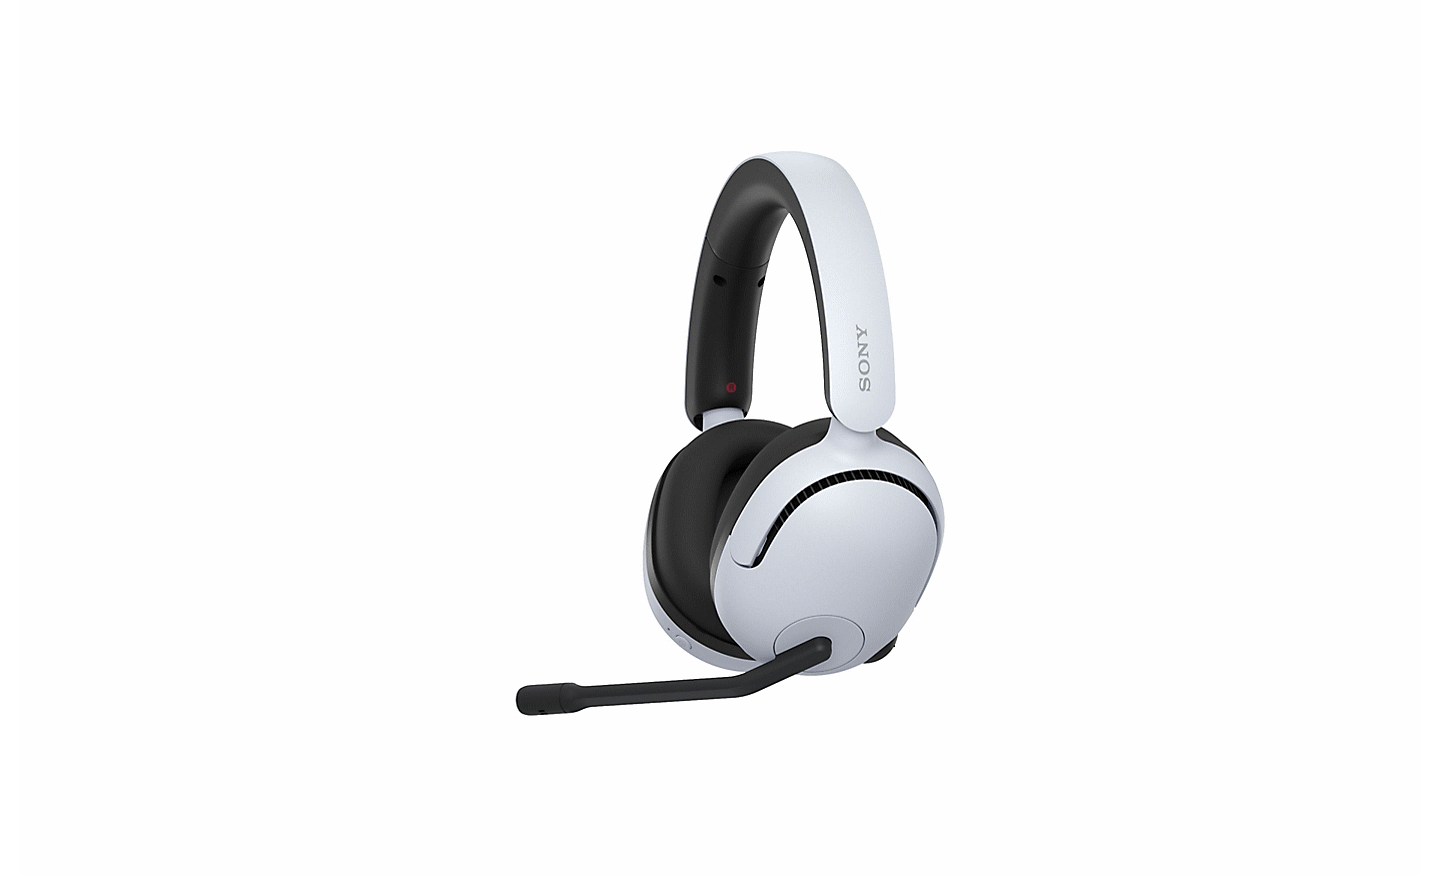 Various images of the white INZONE H5 headphones shot at different angles